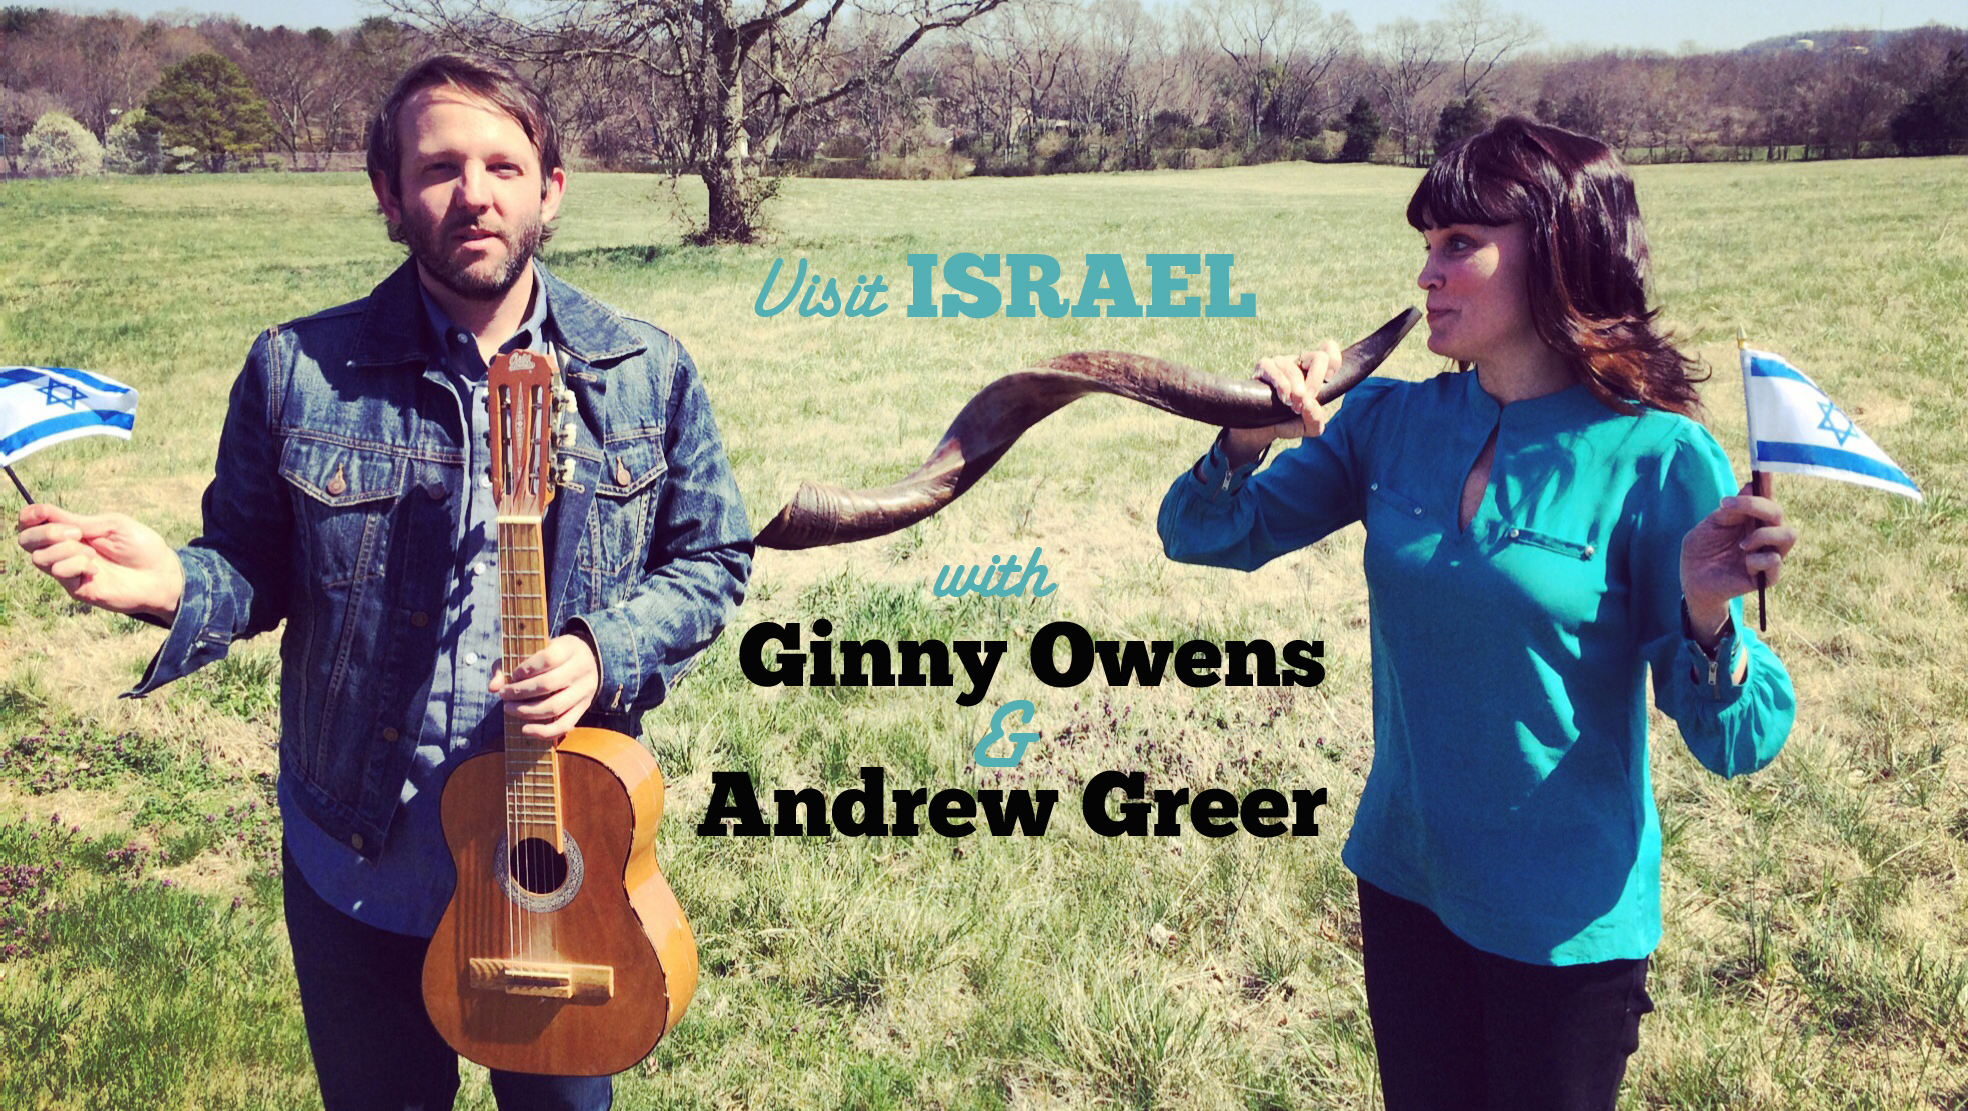 Visit Israel with Andrew Greer and Me!